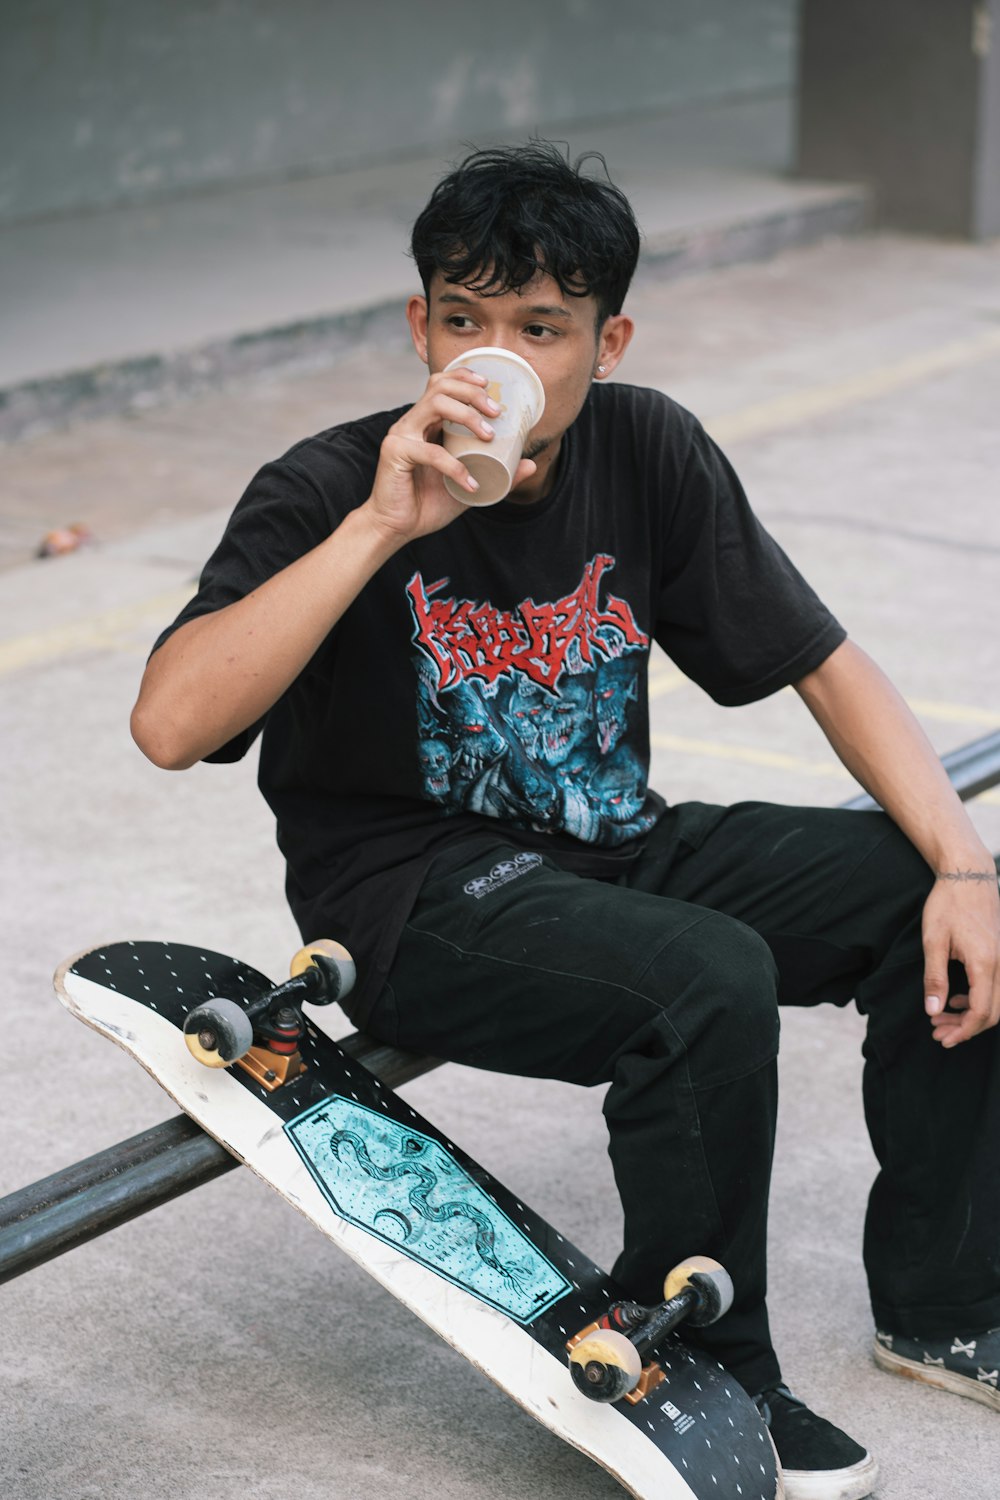 a young man sitting on a skateboard drinking from a cup